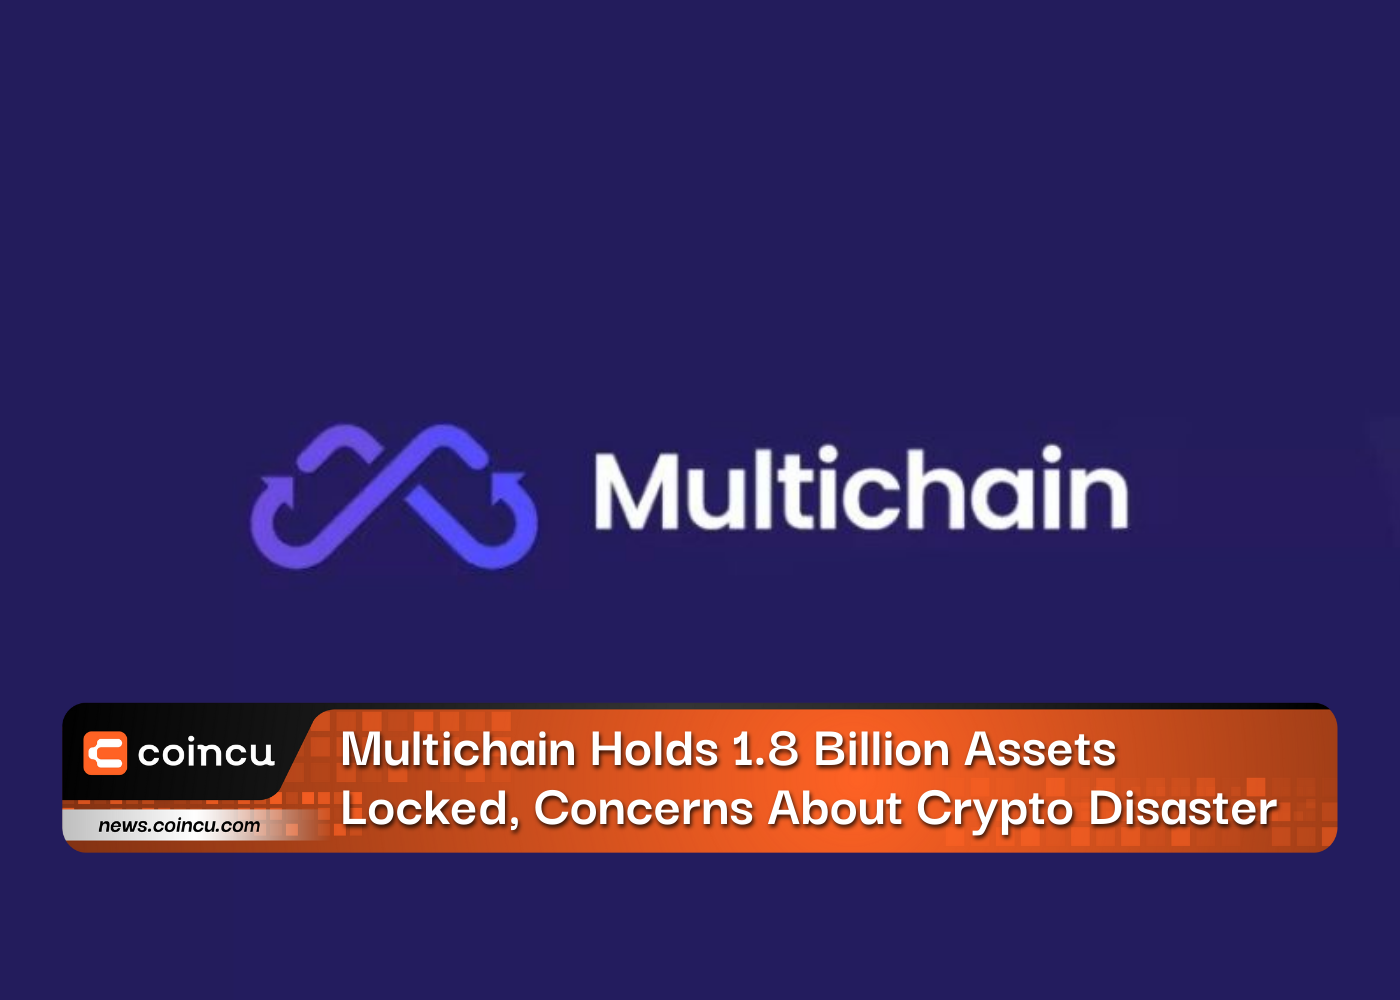 Multichain Holds 1.8 Billion Assets Locked, Concerns About Crypto Disaster